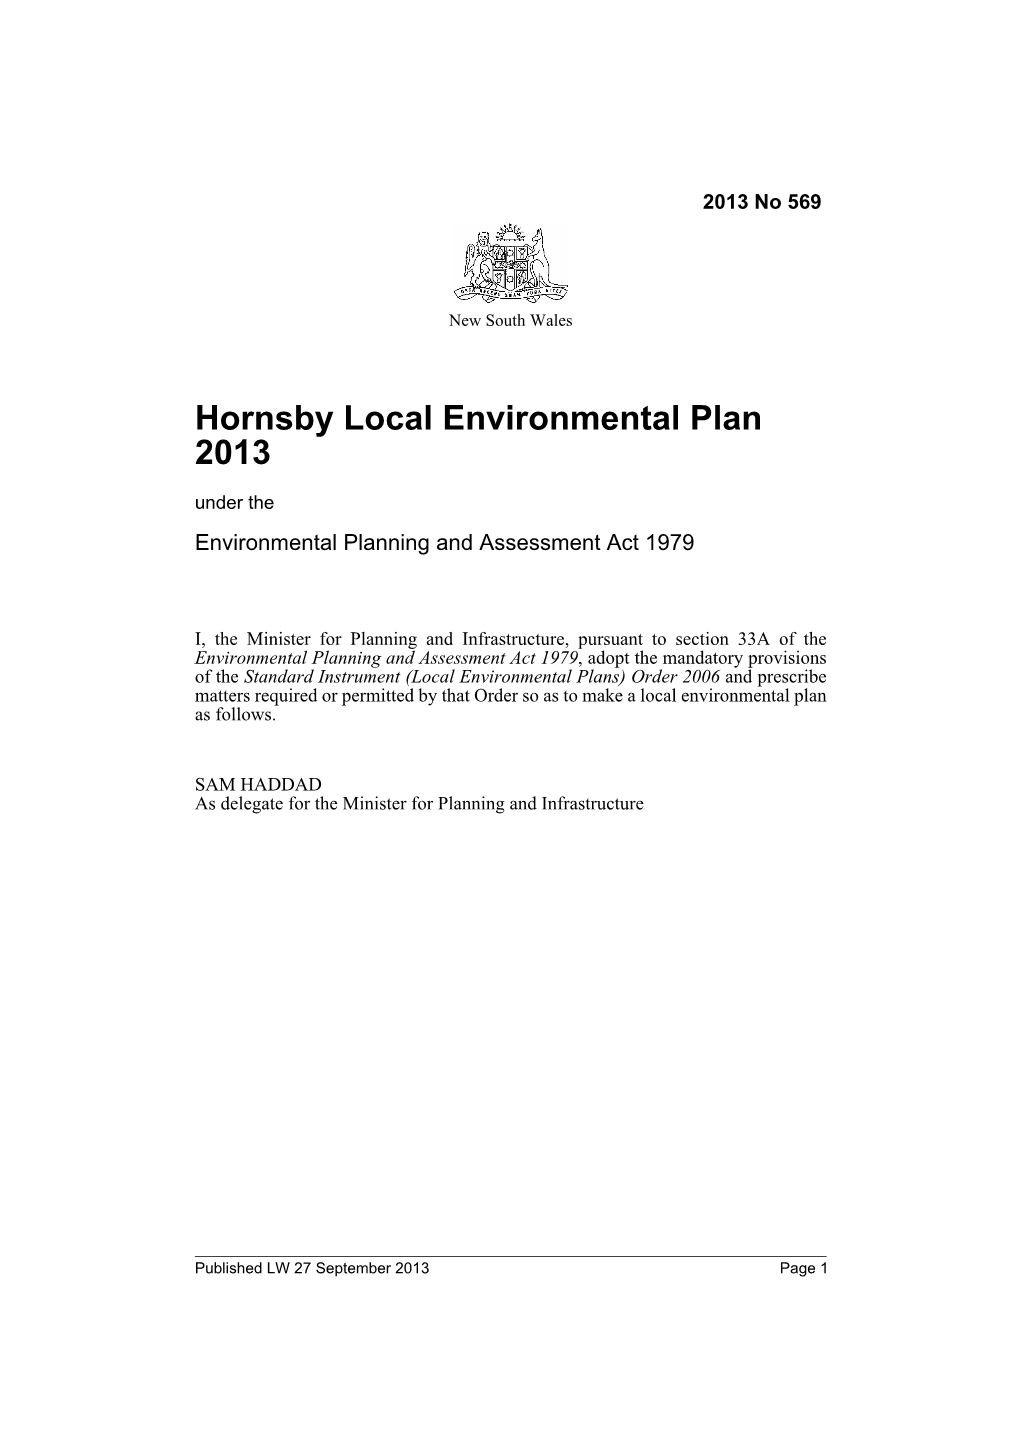 Hornsby Local Environmental Plan 2013 Under the Environmental Planning and Assessment Act 1979